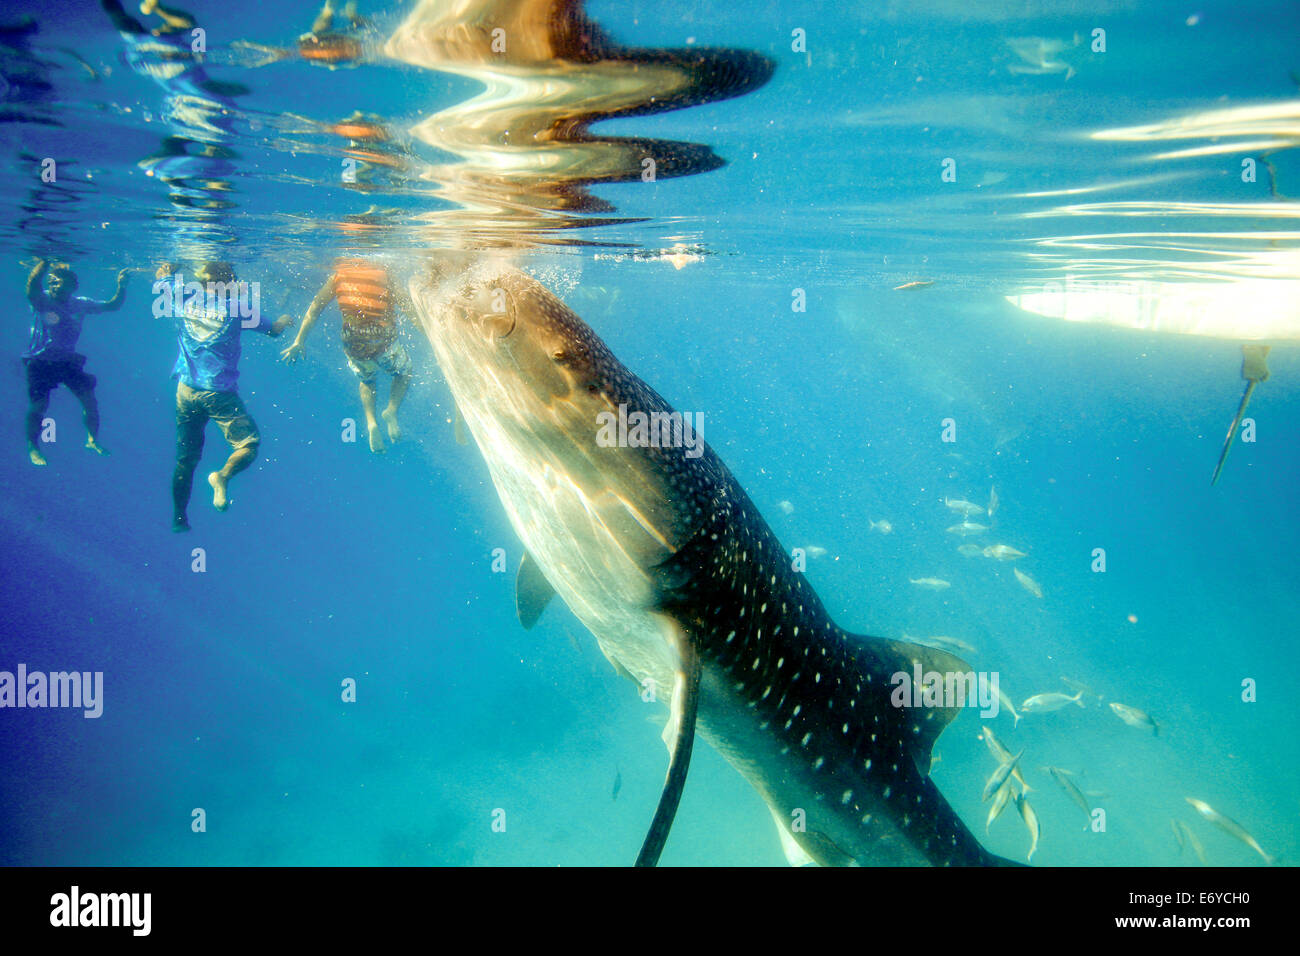 Whale shark underwater filter feeding on krill fed out by fishermen in Oslob, Philippines Stock Photo